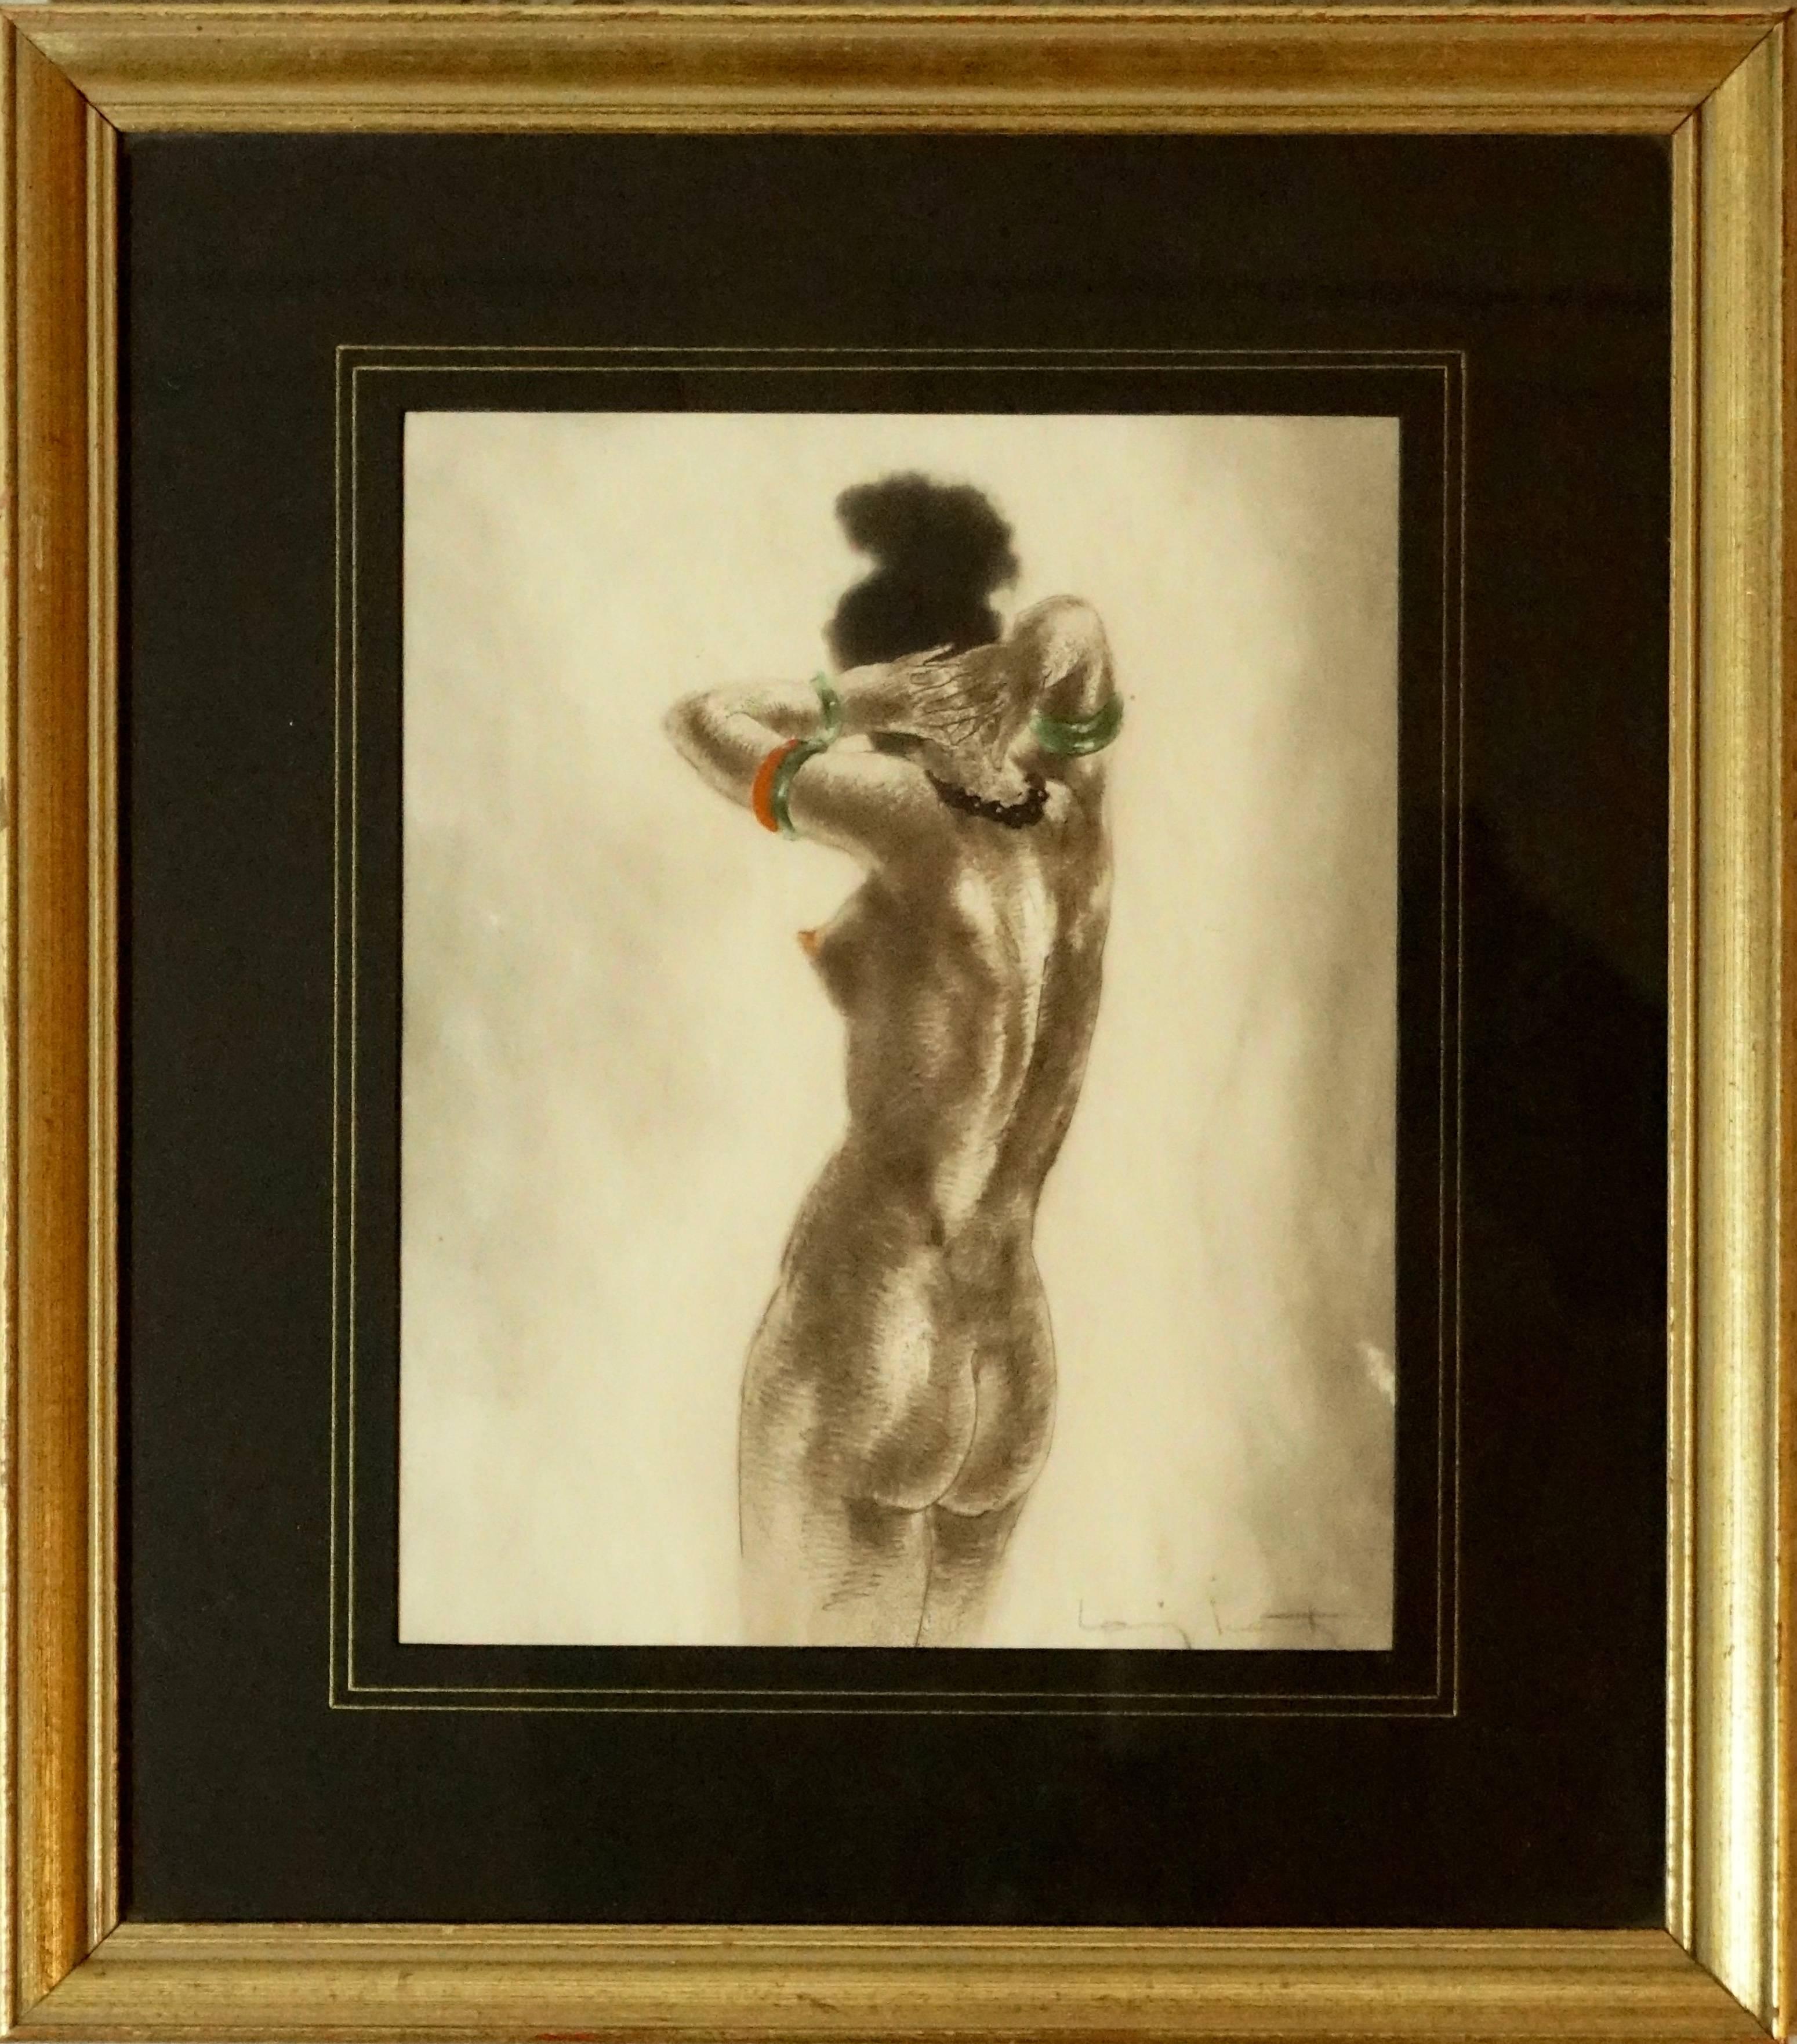 Louis Icart (French, 1888- 1950)
“Highly Swollen Areola”
La Vie Des Seins by Docteur Jacobus, 1945
Limited Edition of 190
Dry point etching on arches paper
Fig. 202, Louis Icart: Erotica
Signed in pencil lr.

An erotic scene of a black woman